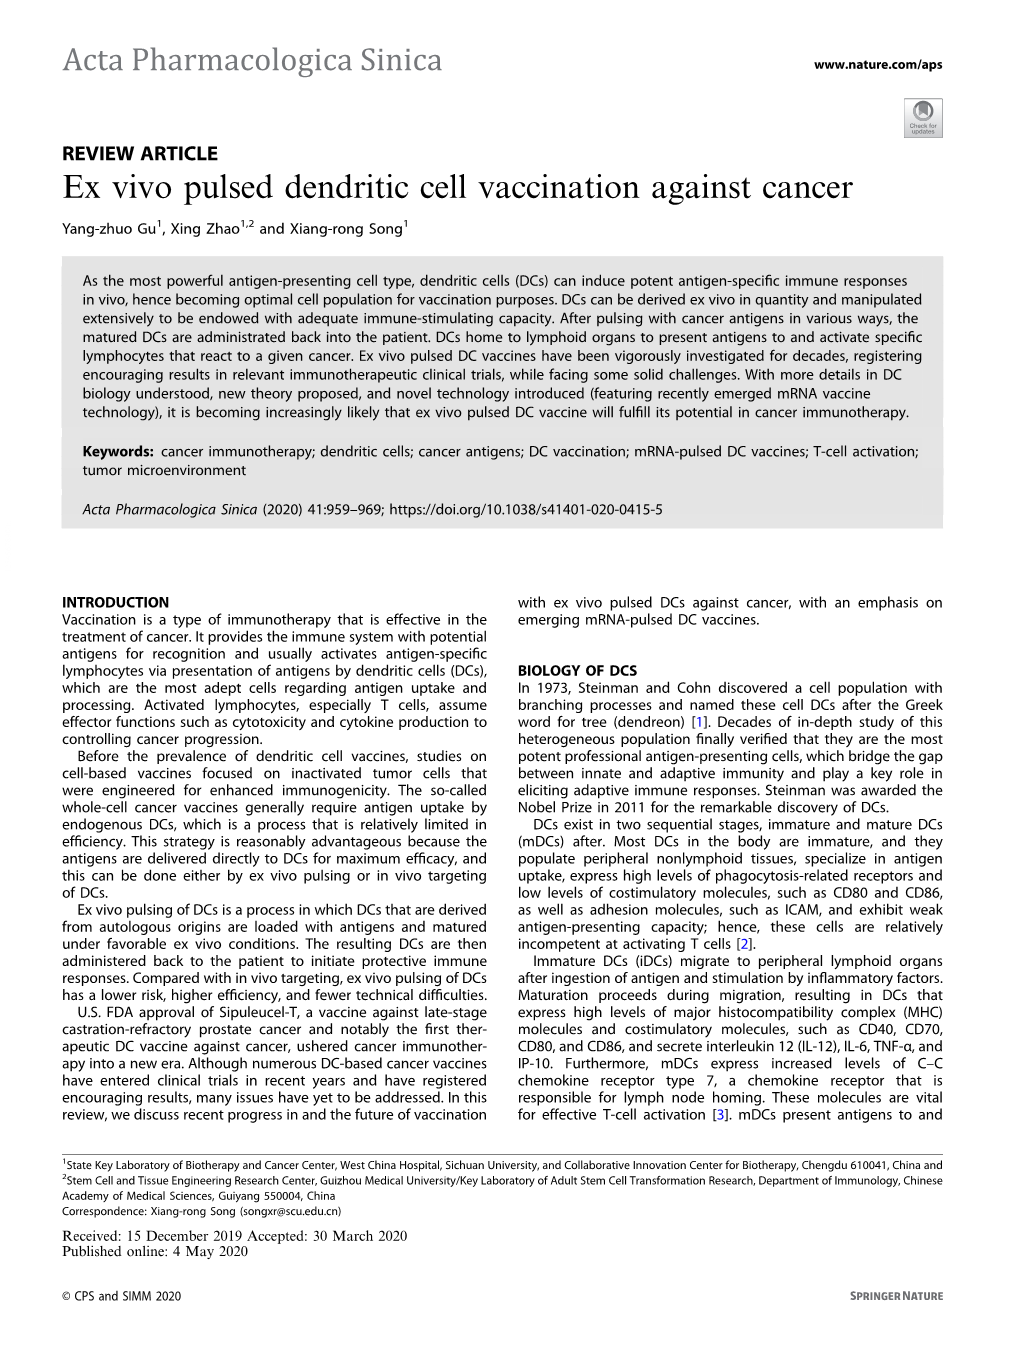 Ex Vivo Pulsed Dendritic Cell Vaccination Against Cancer